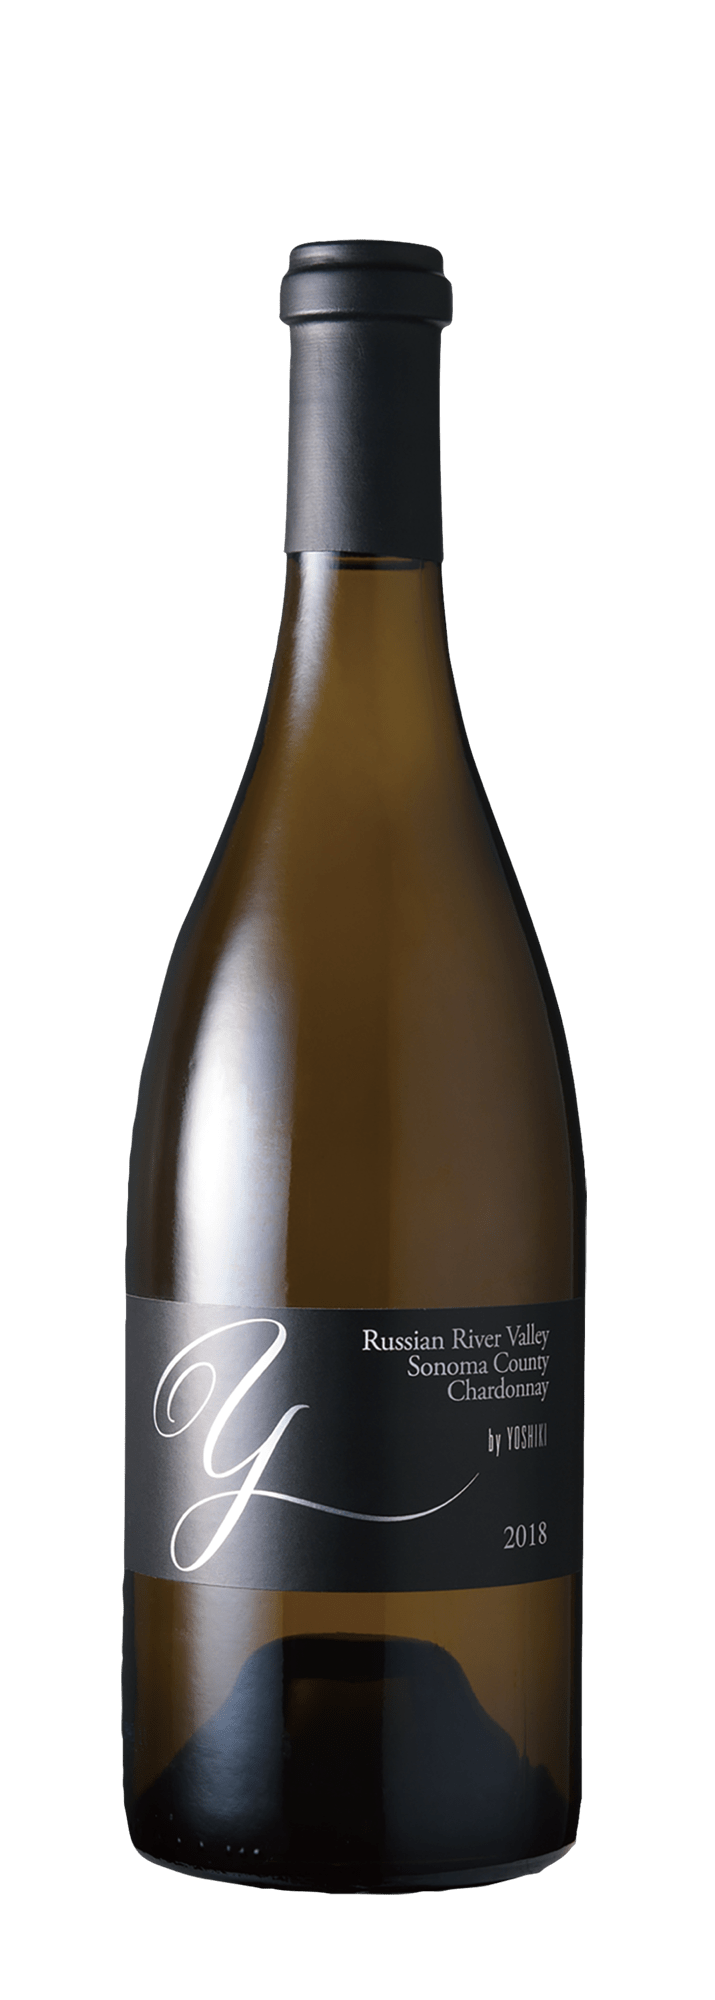 Russian River Valley Chardonnay 2018